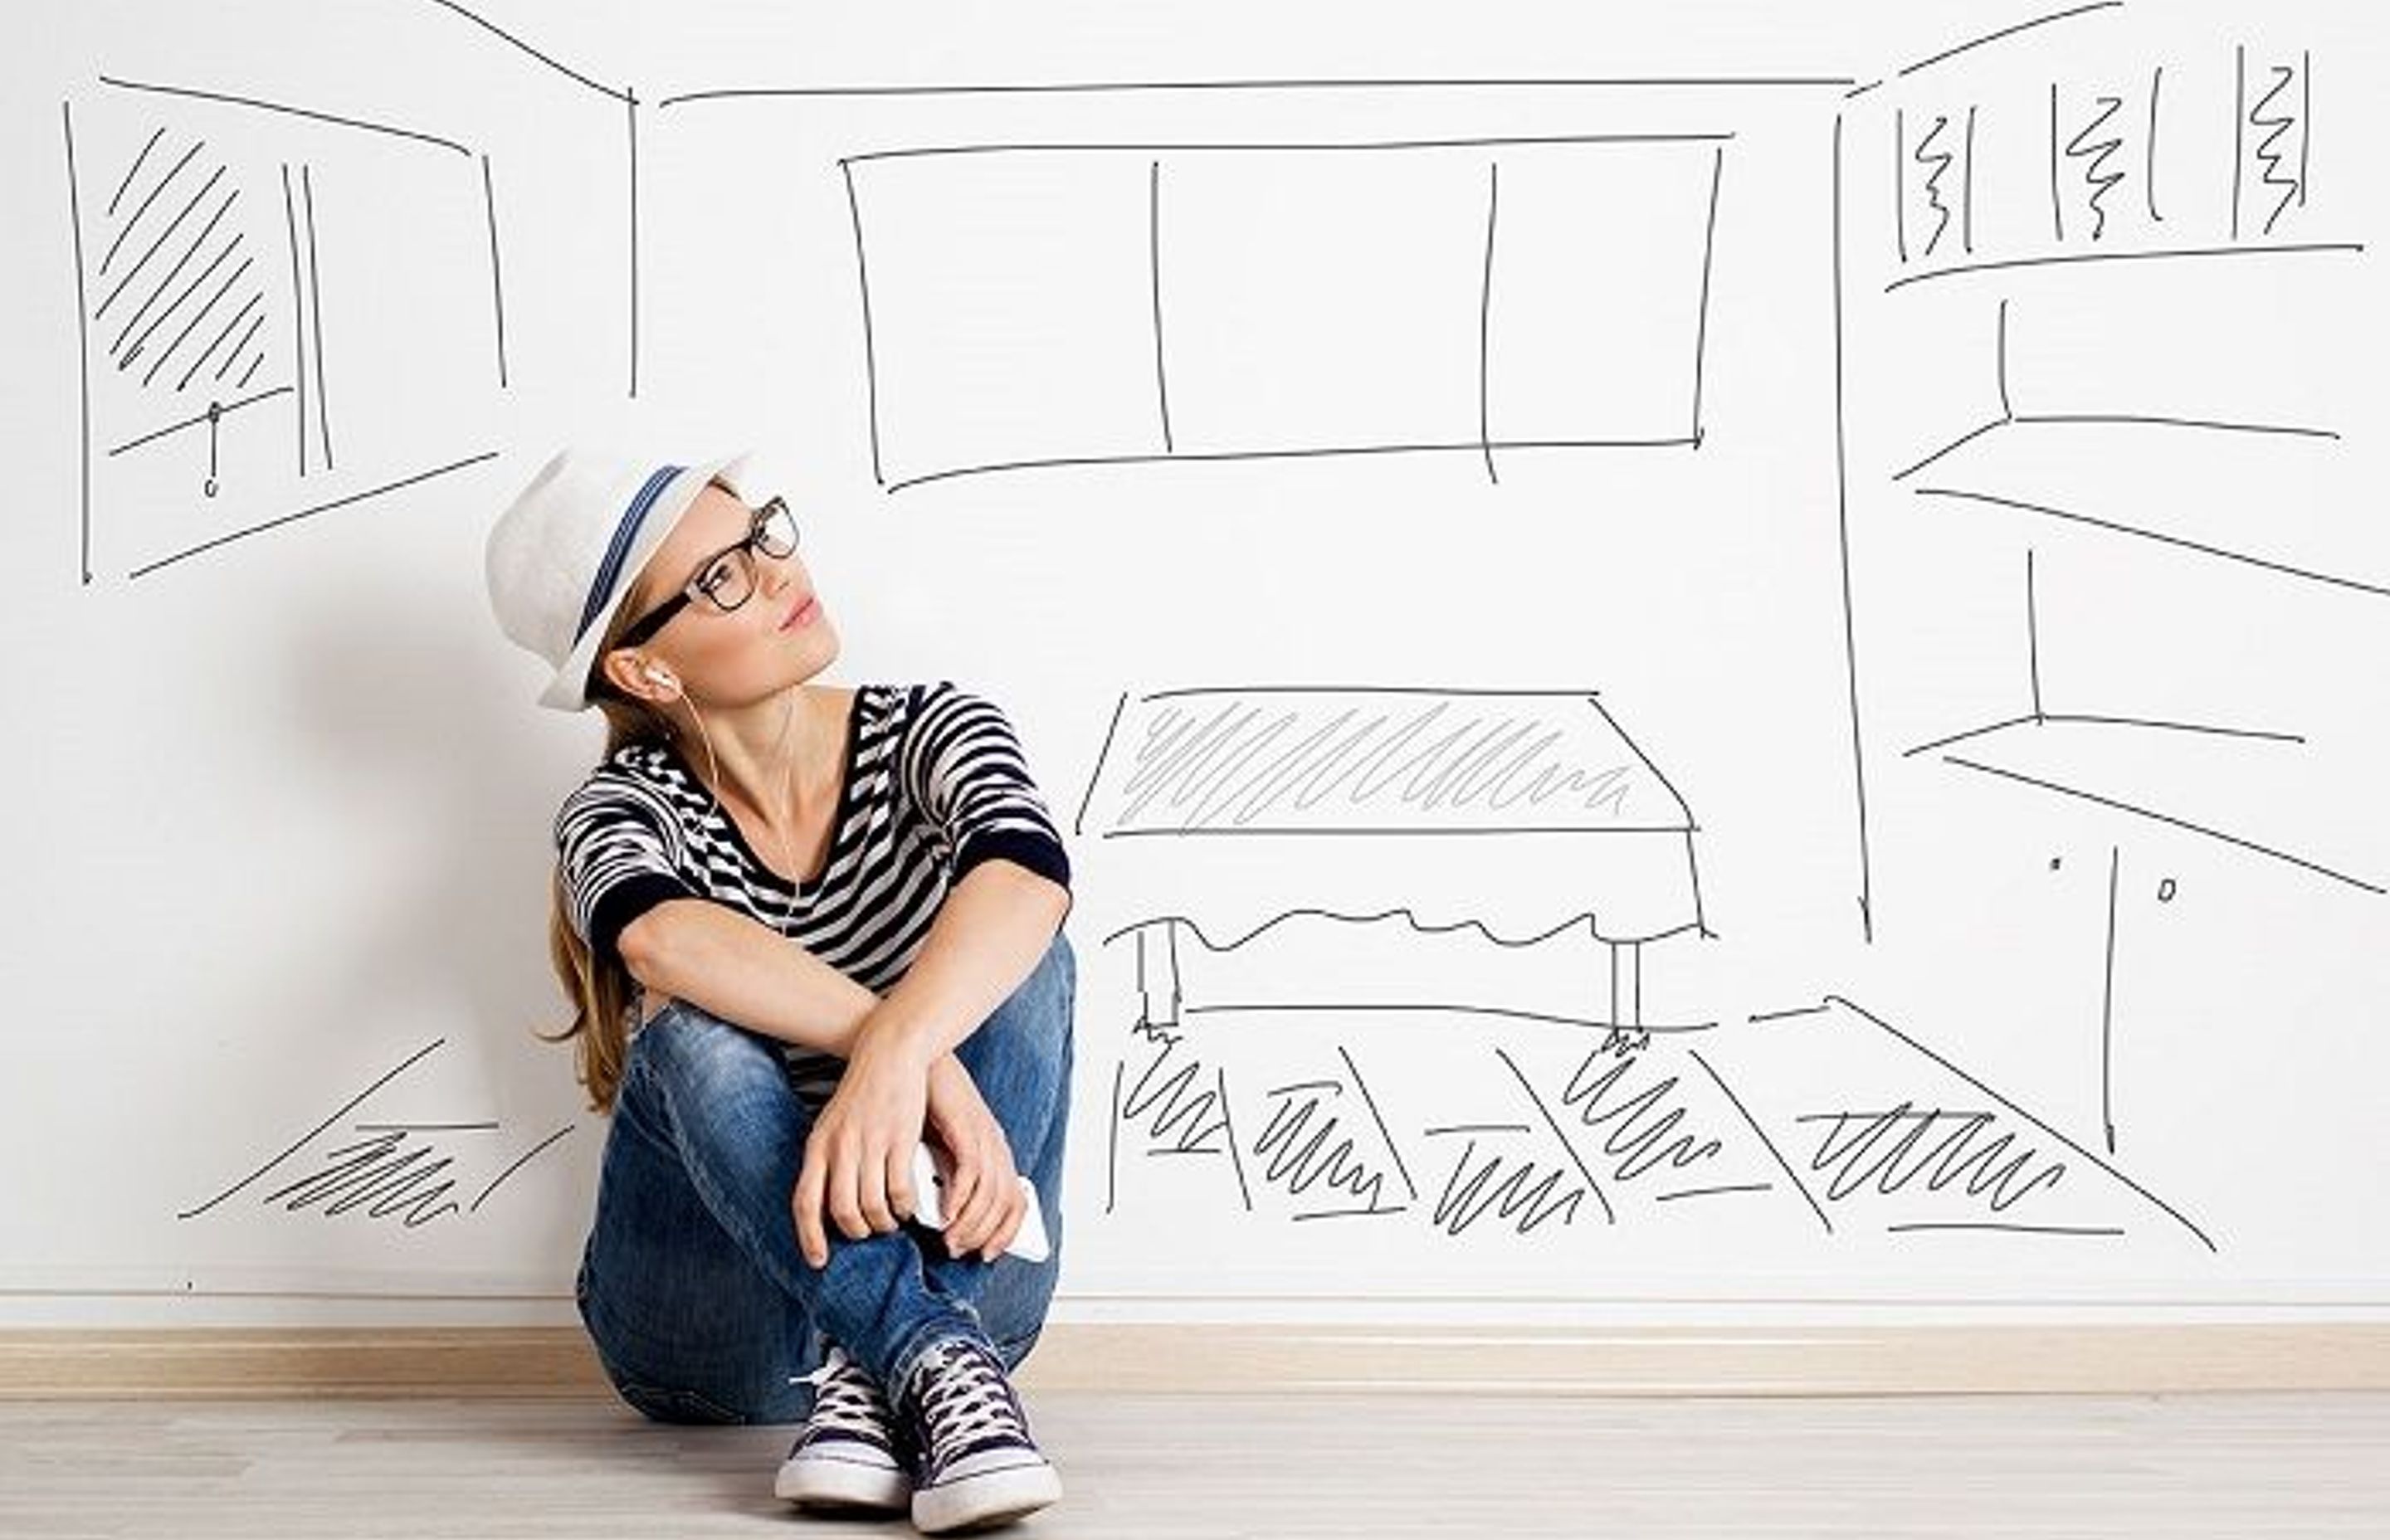 10 Things to Consider When Planning for Your Home Renovation